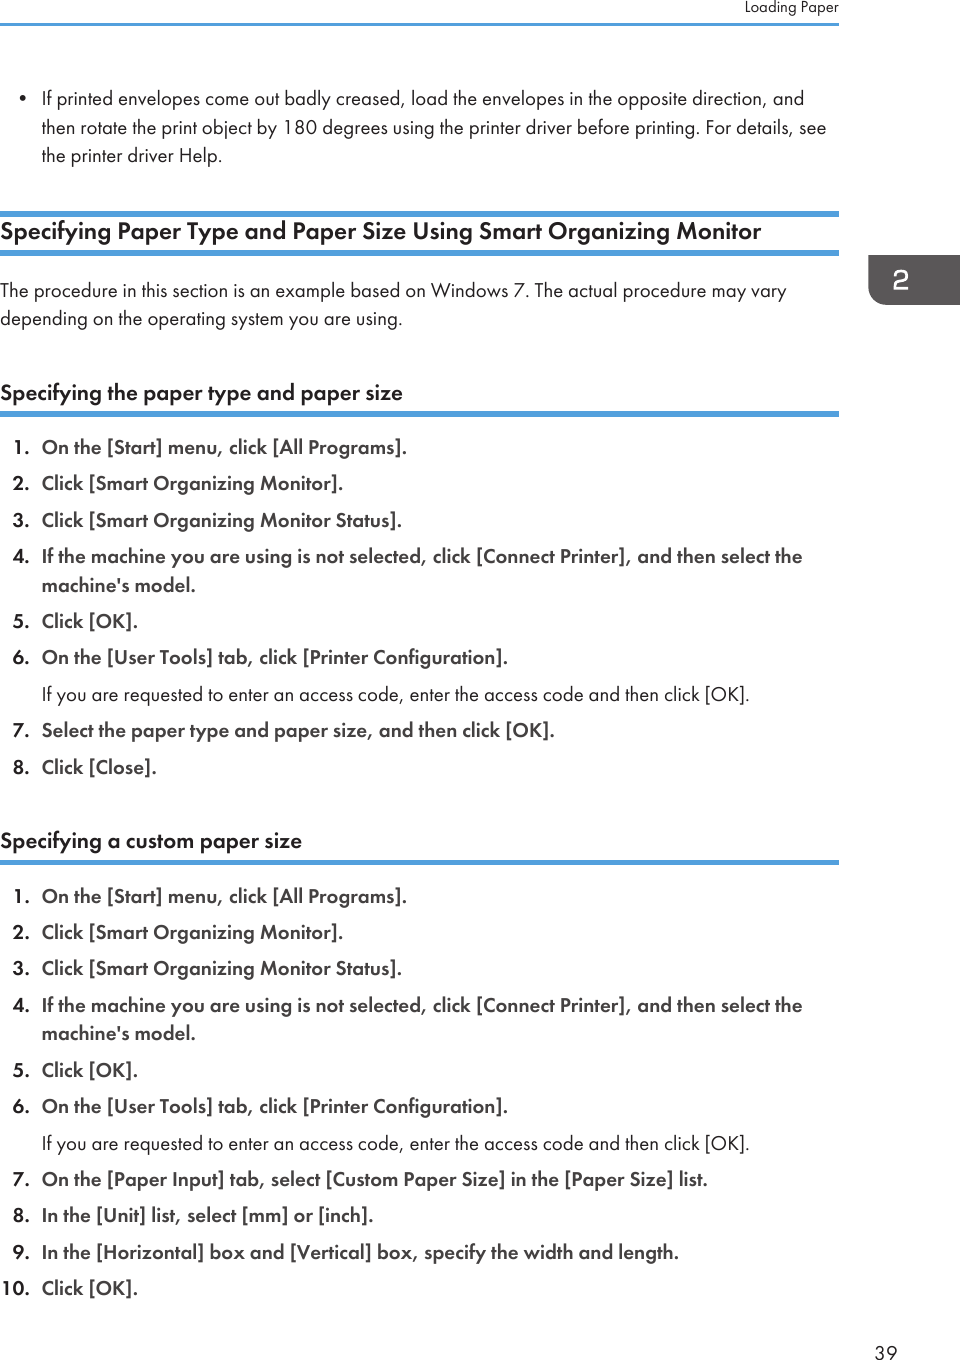 • If printed envelopes come out badly creased, load the envelopes in the opposite direction, andthen rotate the print object by 180 degrees using the printer driver before printing. For details, seethe printer driver Help.Specifying Paper Type and Paper Size Using Smart Organizing MonitorThe procedure in this section is an example based on Windows 7. The actual procedure may varydepending on the operating system you are using.Specifying the paper type and paper size1. On the [Start] menu, click [All Programs].2. Click [Smart Organizing Monitor].3. Click [Smart Organizing Monitor Status].4. If the machine you are using is not selected, click [Connect Printer], and then select themachine&apos;s model.5. Click [OK].6. On the [User Tools] tab, click [Printer Configuration].If you are requested to enter an access code, enter the access code and then click [OK].7. Select the paper type and paper size, and then click [OK].8. Click [Close].Specifying a custom paper size1. On the [Start] menu, click [All Programs].2. Click [Smart Organizing Monitor].3. Click [Smart Organizing Monitor Status].4. If the machine you are using is not selected, click [Connect Printer], and then select themachine&apos;s model.5. Click [OK].6. On the [User Tools] tab, click [Printer Configuration].If you are requested to enter an access code, enter the access code and then click [OK].7. On the [Paper Input] tab, select [Custom Paper Size] in the [Paper Size] list.8. In the [Unit] list, select [mm] or [inch].9. In the [Horizontal] box and [Vertical] box, specify the width and length.10. Click [OK].Loading Paper39